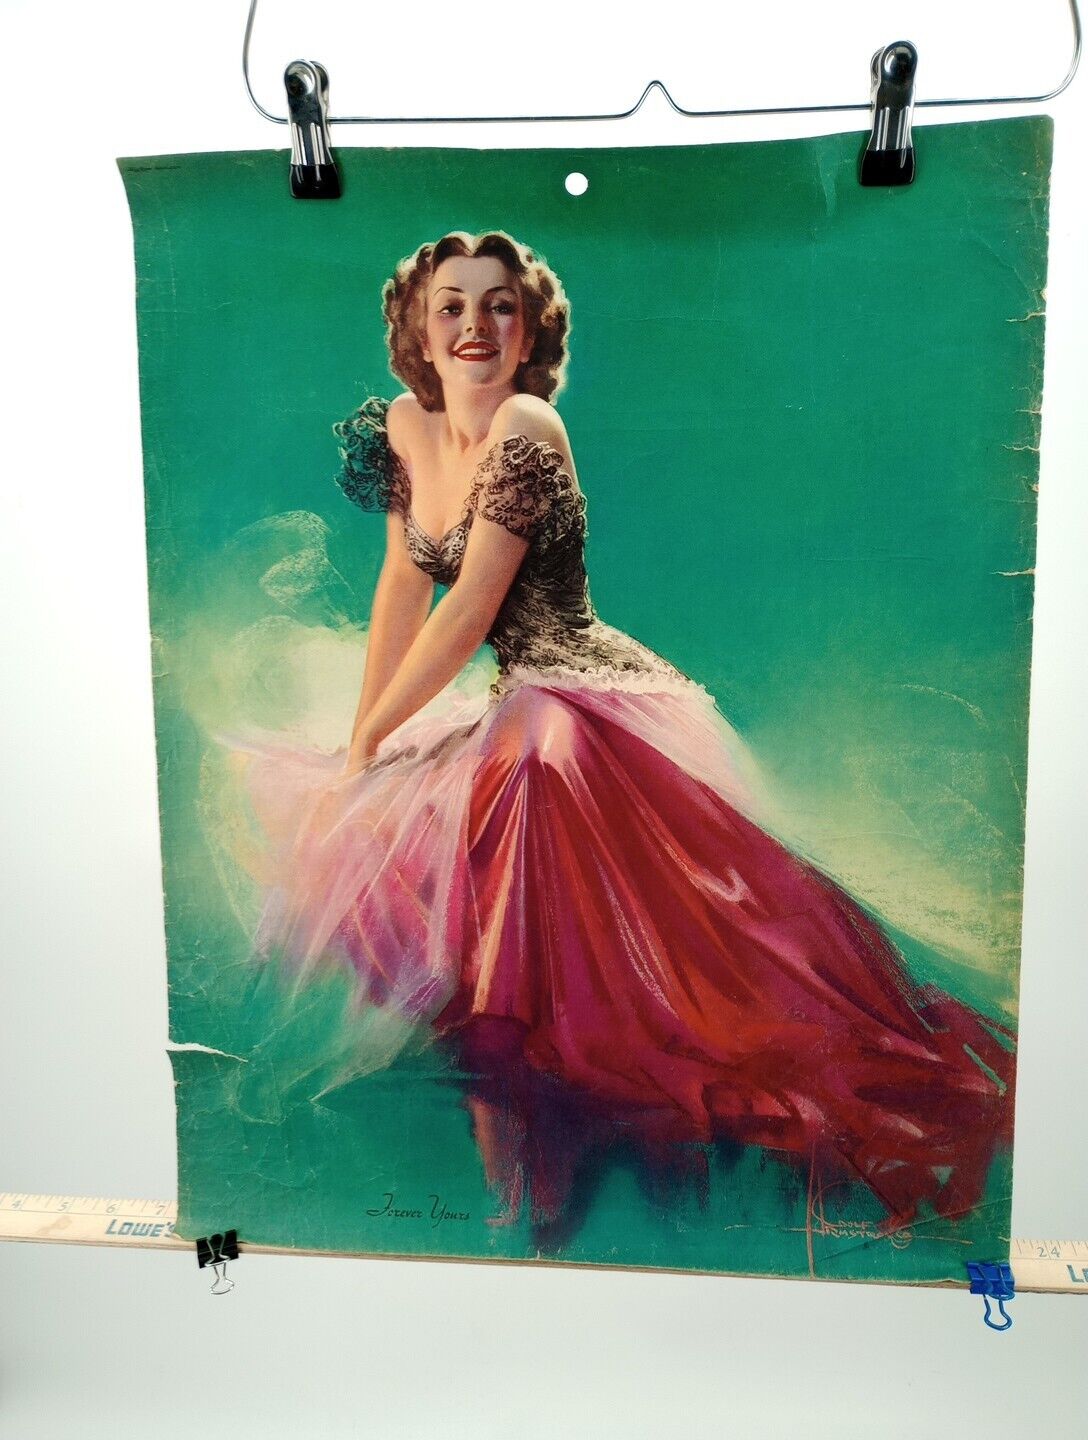 Vtg Rolf Armstrong pin-up Forever Yours Calendar Cover Print 1940s 20 X 15.5 in